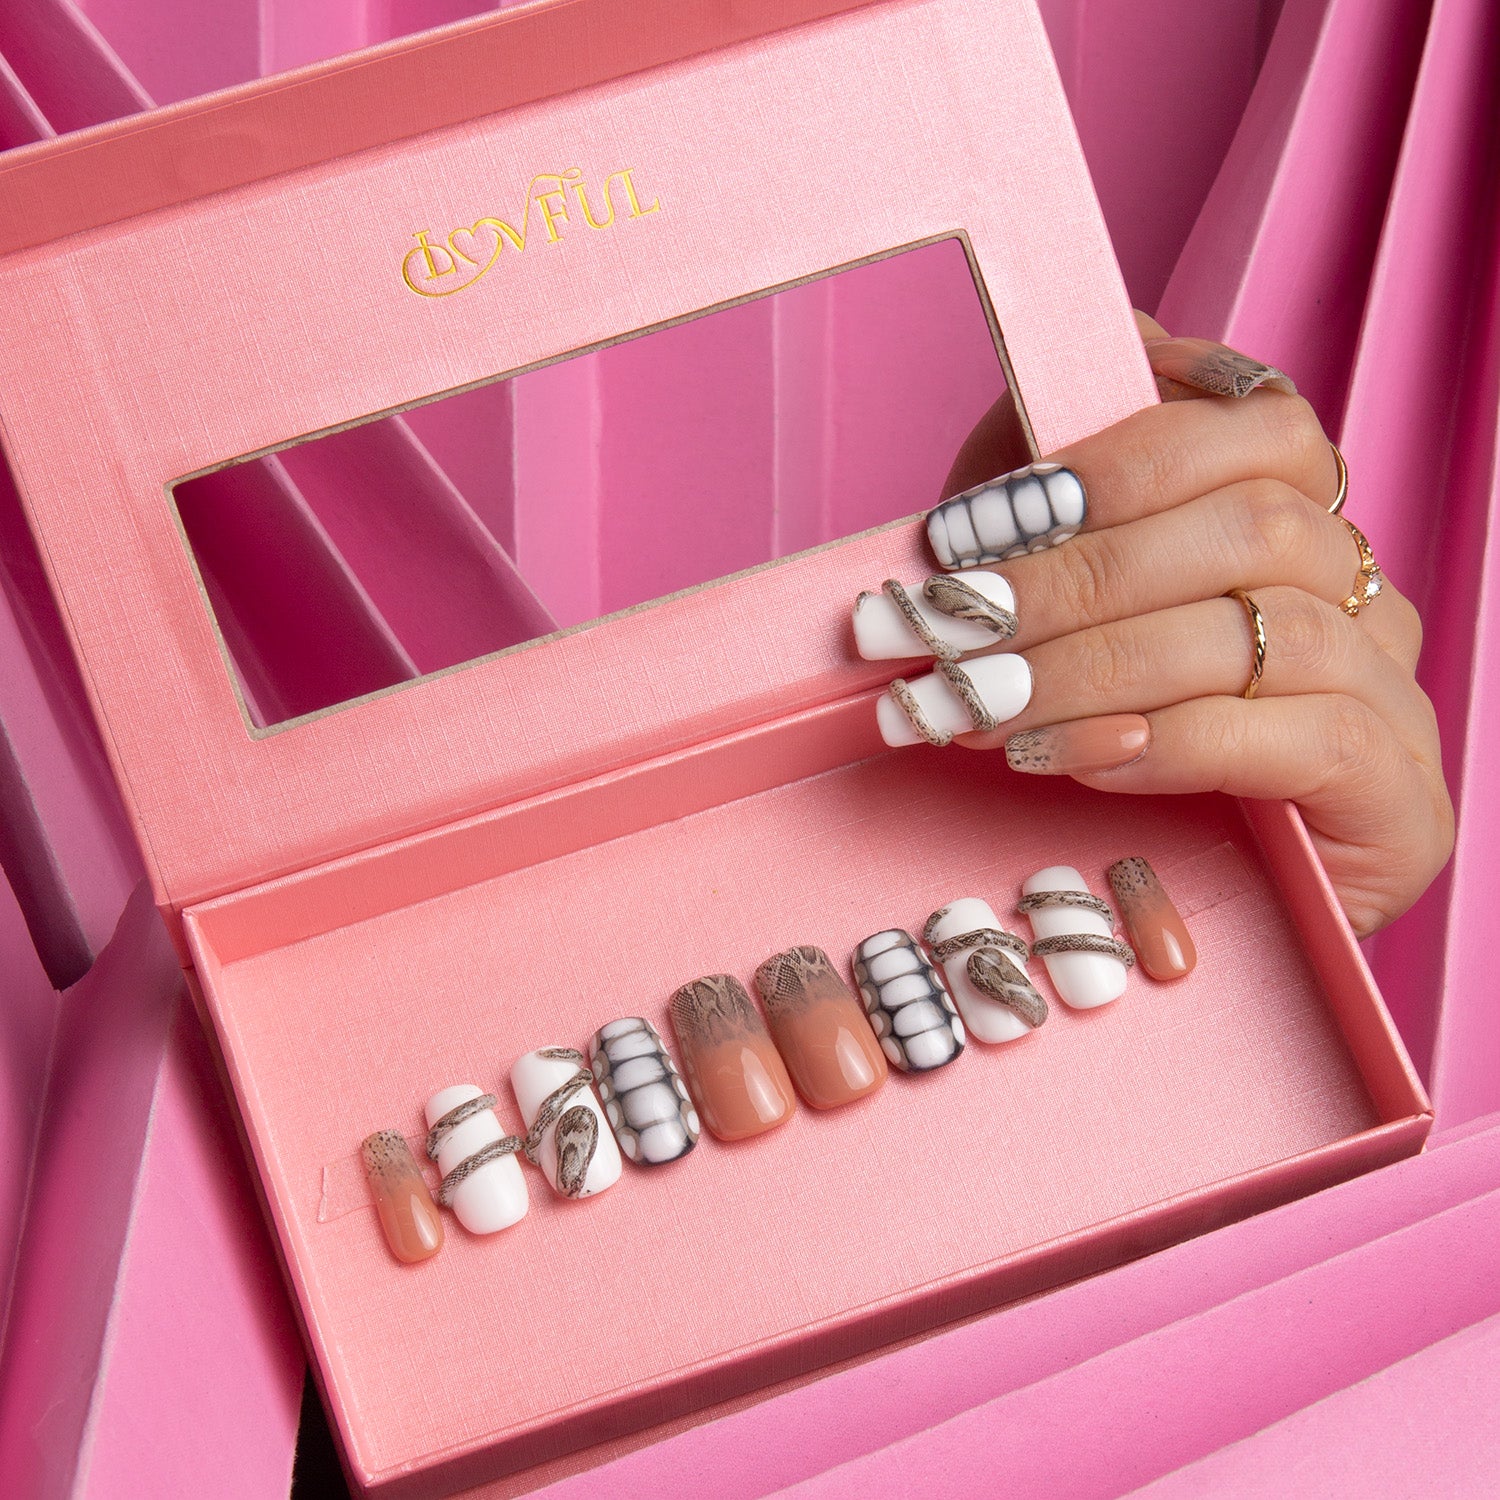 Lovful 'Sahara' press-on nail set in a pink box, featuring pure white base with subtle sand effect, snake designs, and various patterns. A hand with similar manicured nails is holding the box.